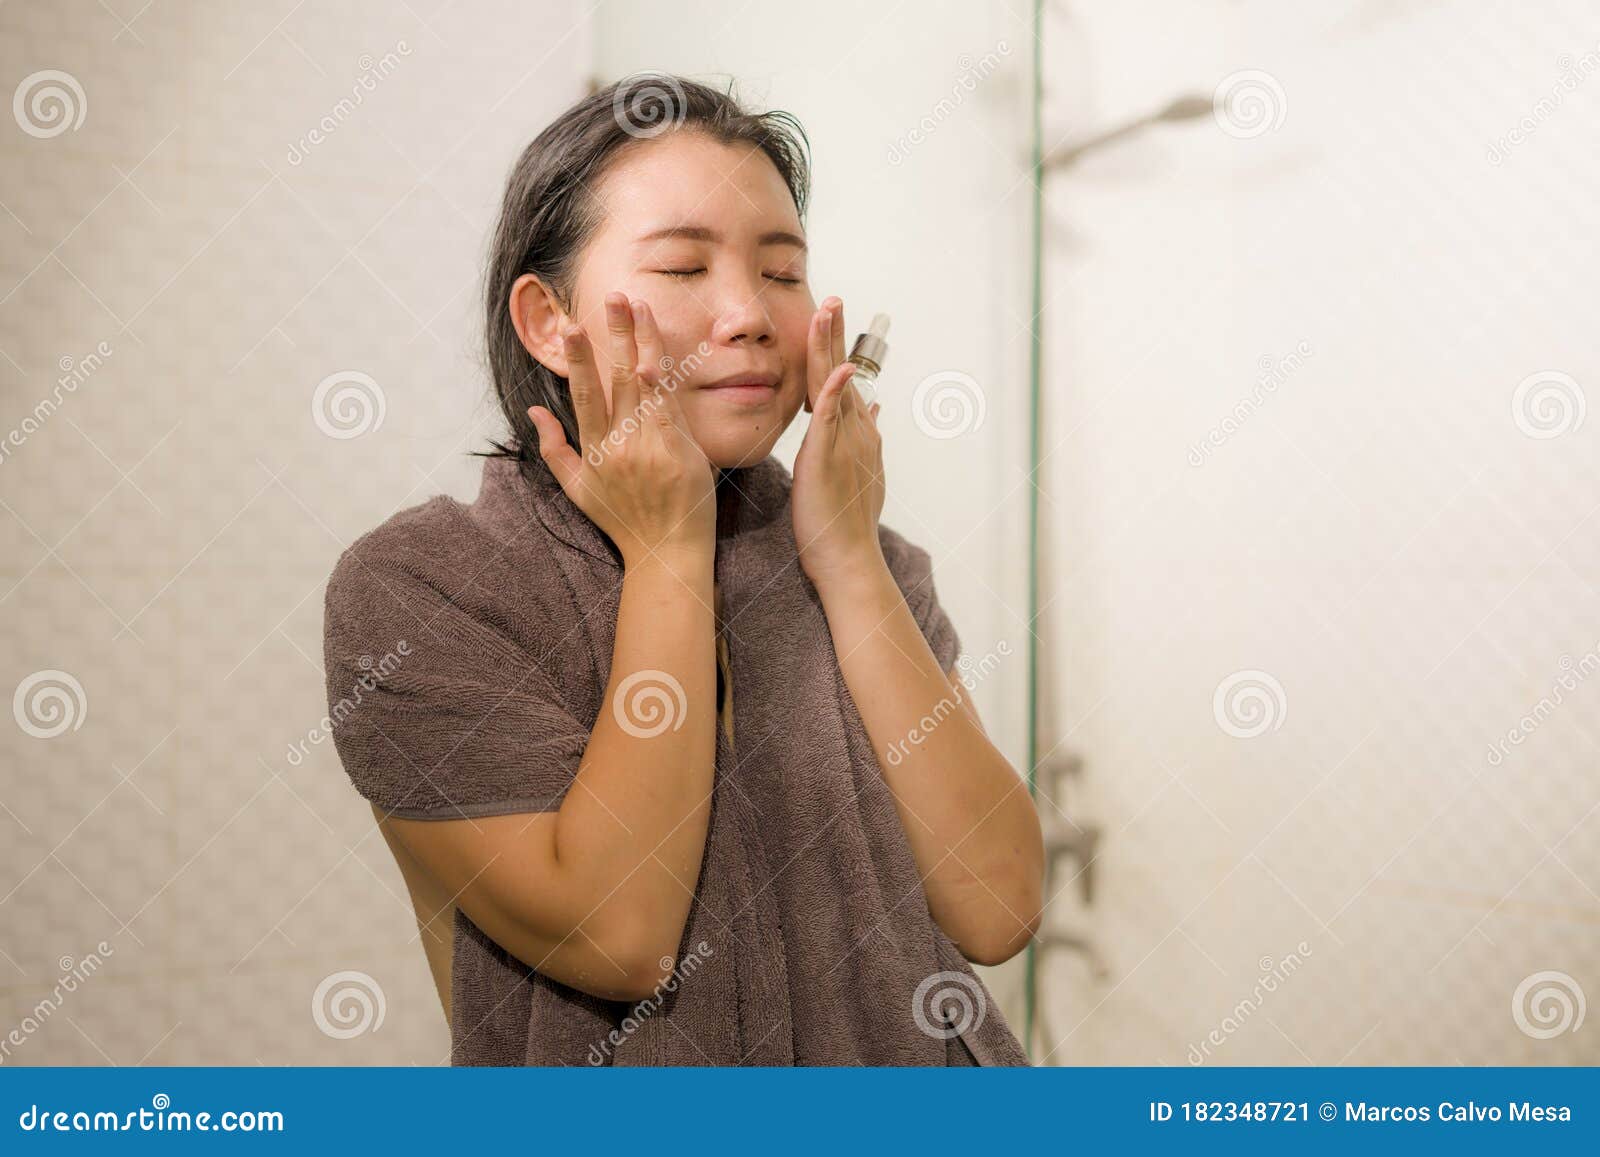 young beautiful and happy asian korean woman applying serum facial skin care and face treatment in the bathroom enjoying morning